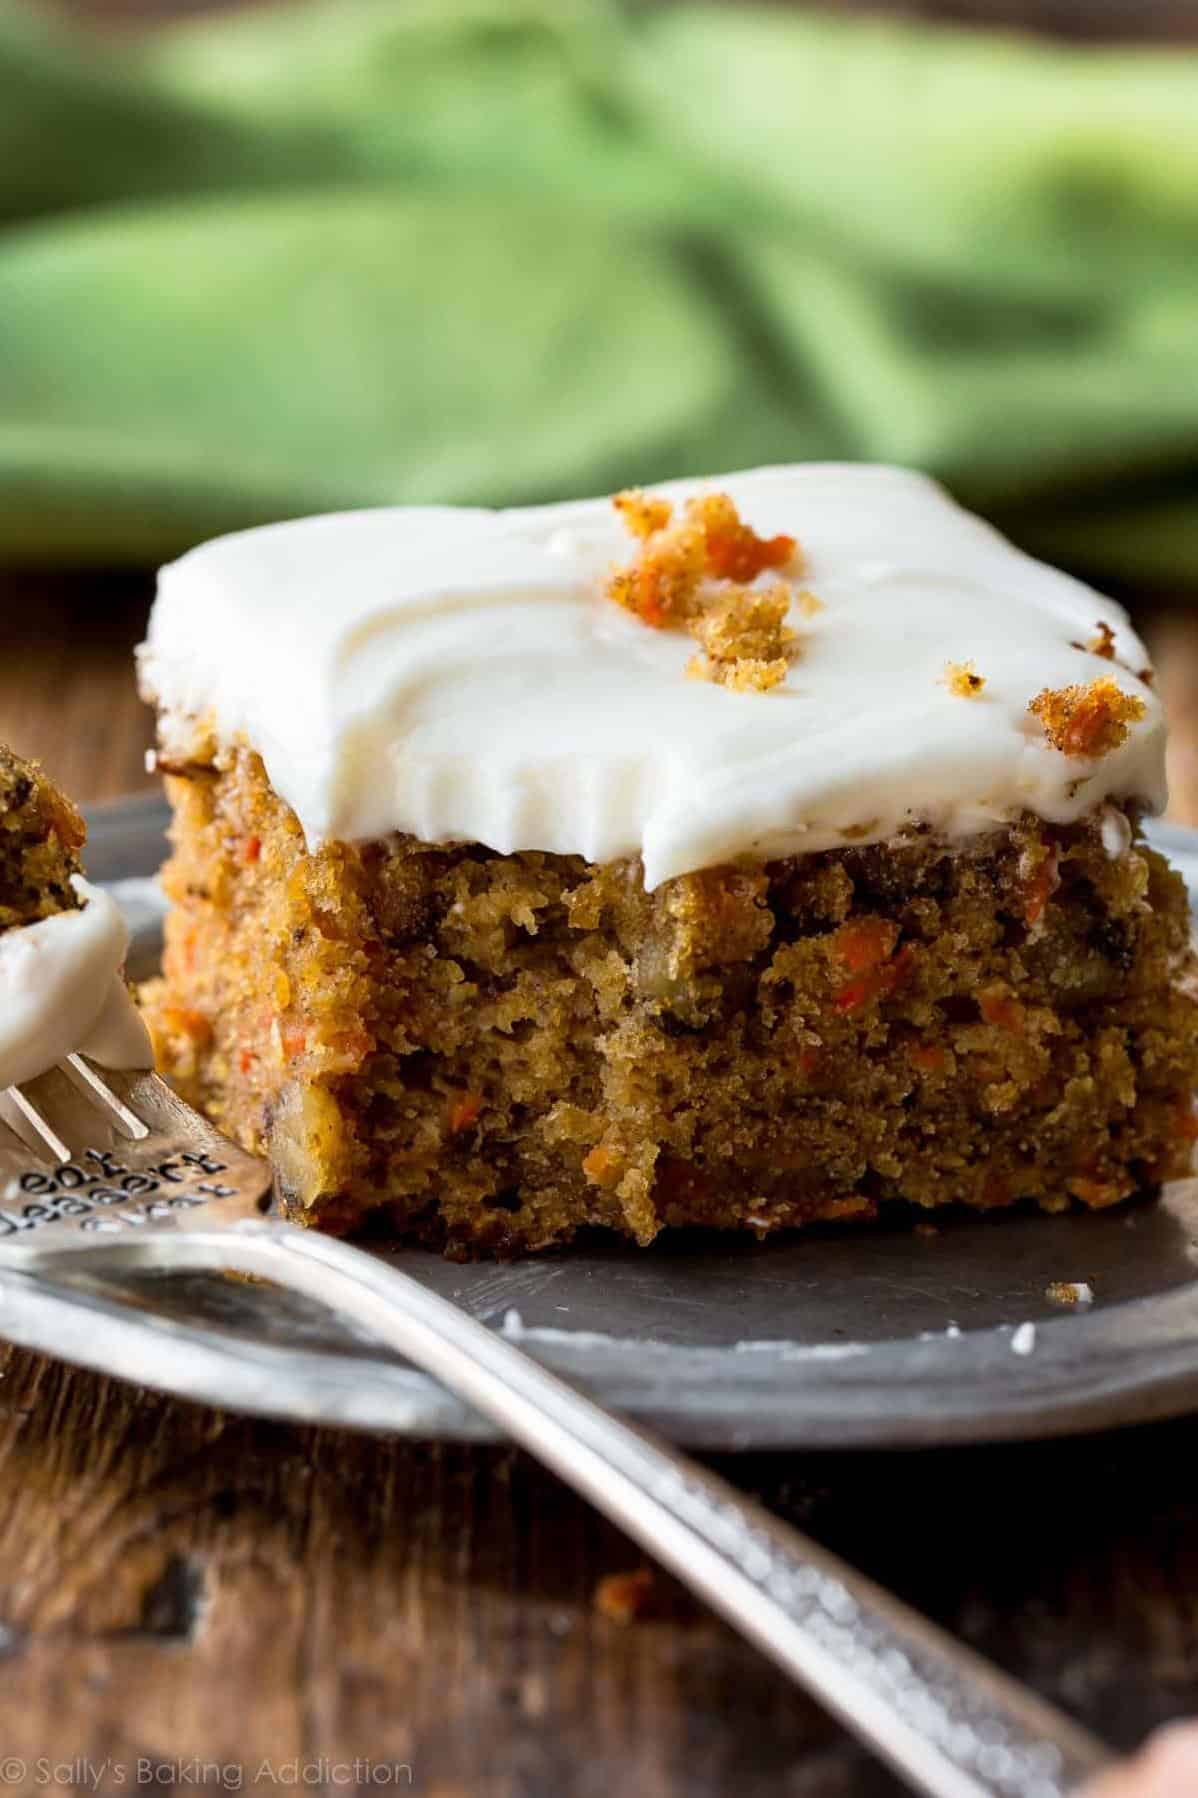  This cake is a beautiful mess of healthy ingredients and delicious flavors.